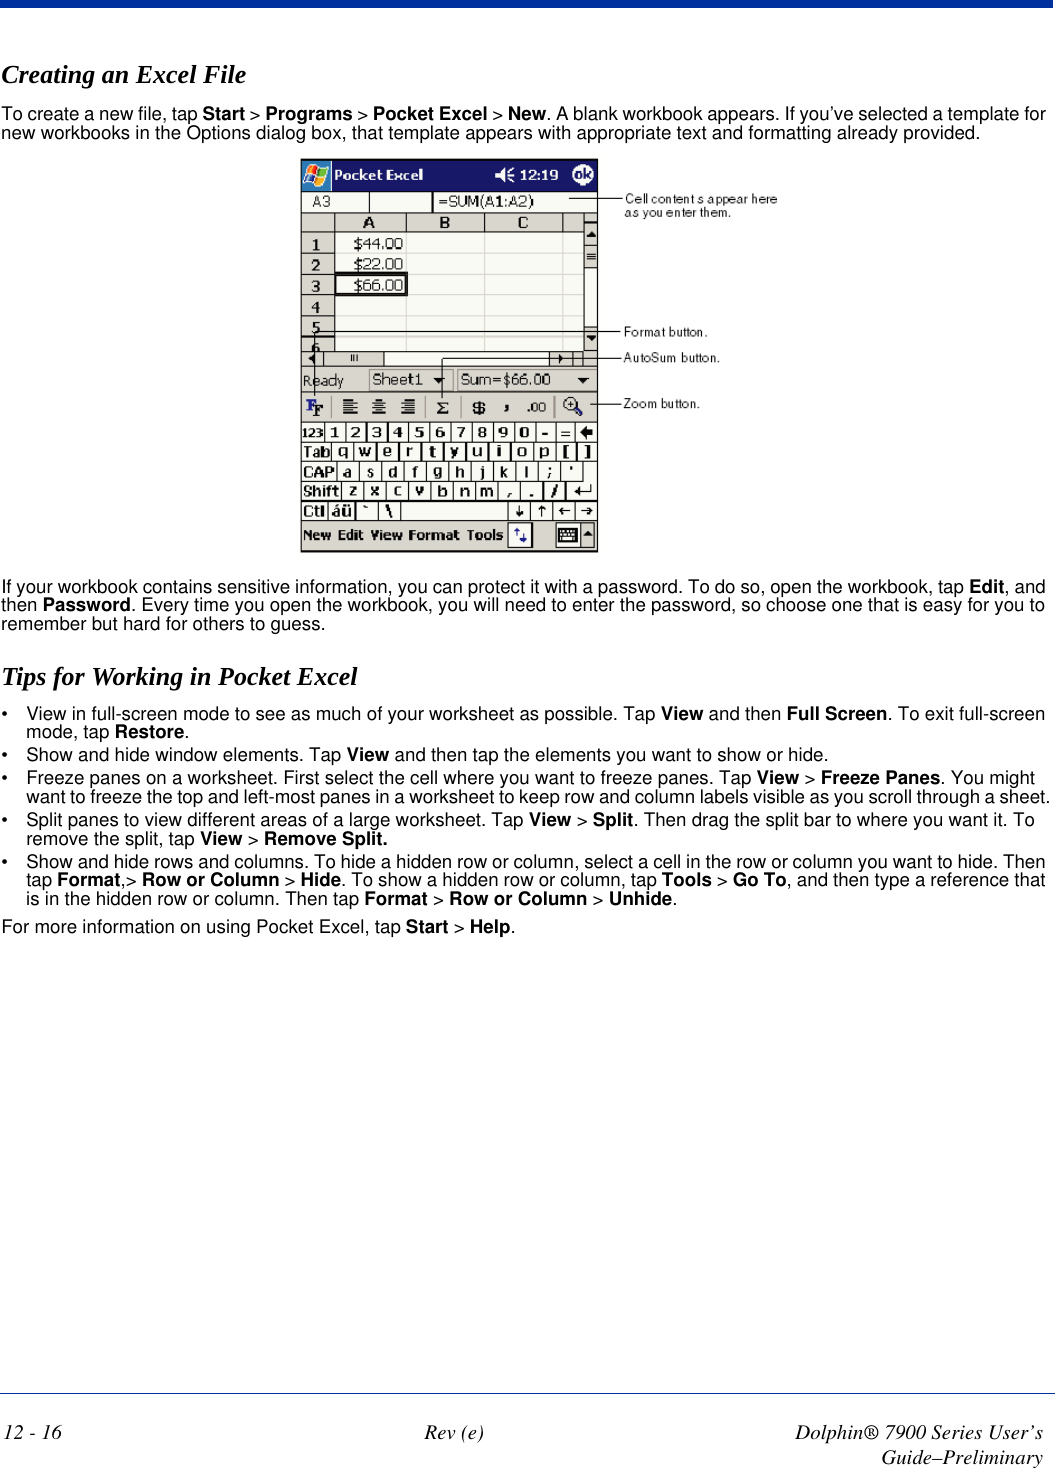 12 - 16 Rev (e) Dolphin® 7900 Series User’s Guide–PreliminaryCreating an Excel FileTo create a new file, tap Start &gt; Programs &gt; Pocket Excel &gt; New. A blank workbook appears. If you’ve selected a template for new workbooks in the Options dialog box, that template appears with appropriate text and formatting already provided. If your workbook contains sensitive information, you can protect it with a password. To do so, open the workbook, tap Edit, and then Password. Every time you open the workbook, you will need to enter the password, so choose one that is easy for you to remember but hard for others to guess.Tips for Working in Pocket Excel•           View in full-screen mode to see as much of your worksheet as possible. Tap View and then Full Screen. To exit full-screen mode, tap Restore.•           Show and hide window elements. Tap View and then tap the elements you want to show or hide.•           Freeze panes on a worksheet. First select the cell where you want to freeze panes. Tap View &gt; Freeze Panes. You might want to freeze the top and left-most panes in a worksheet to keep row and column labels visible as you scroll through a sheet.•           Split panes to view different areas of a large worksheet. Tap View &gt; Split. Then drag the split bar to where you want it. To remove the split, tap View &gt; Remove Split.•           Show and hide rows and columns. To hide a hidden row or column, select a cell in the row or column you want to hide. Then tap Format,&gt; Row or Column &gt; Hide. To show a hidden row or column, tap Tools &gt; Go To, and then type a reference that is in the hidden row or column. Then tap Format &gt; Row or Column &gt; Unhide.For more information on using Pocket Excel, tap Start &gt; Help.